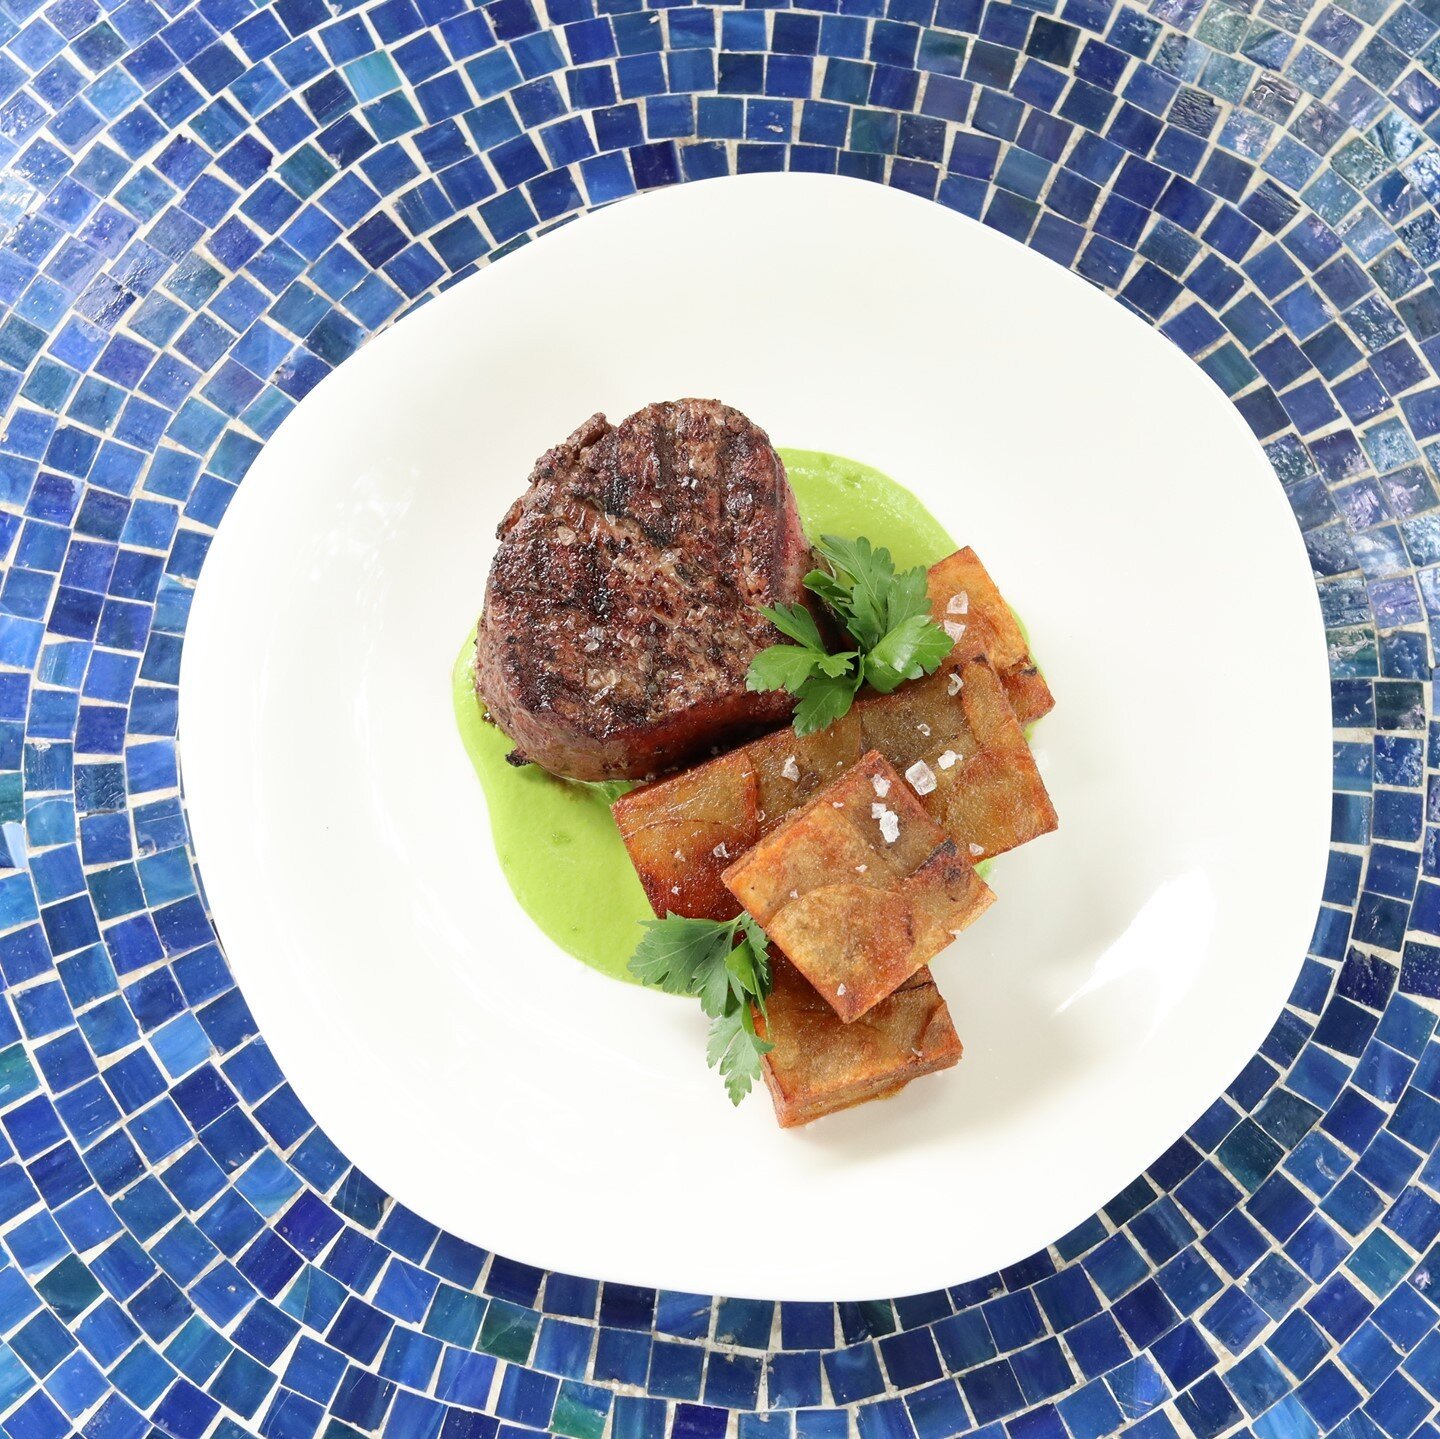 Our new beef tenderloin takes steak and potatoes to the next level--a tender 8oz filet over fava bean puree with a pave that's a work of potato art genius. Could there be anything more perfect for Father's Day? ⁠
⁠
P.S. If you are planning to celebra